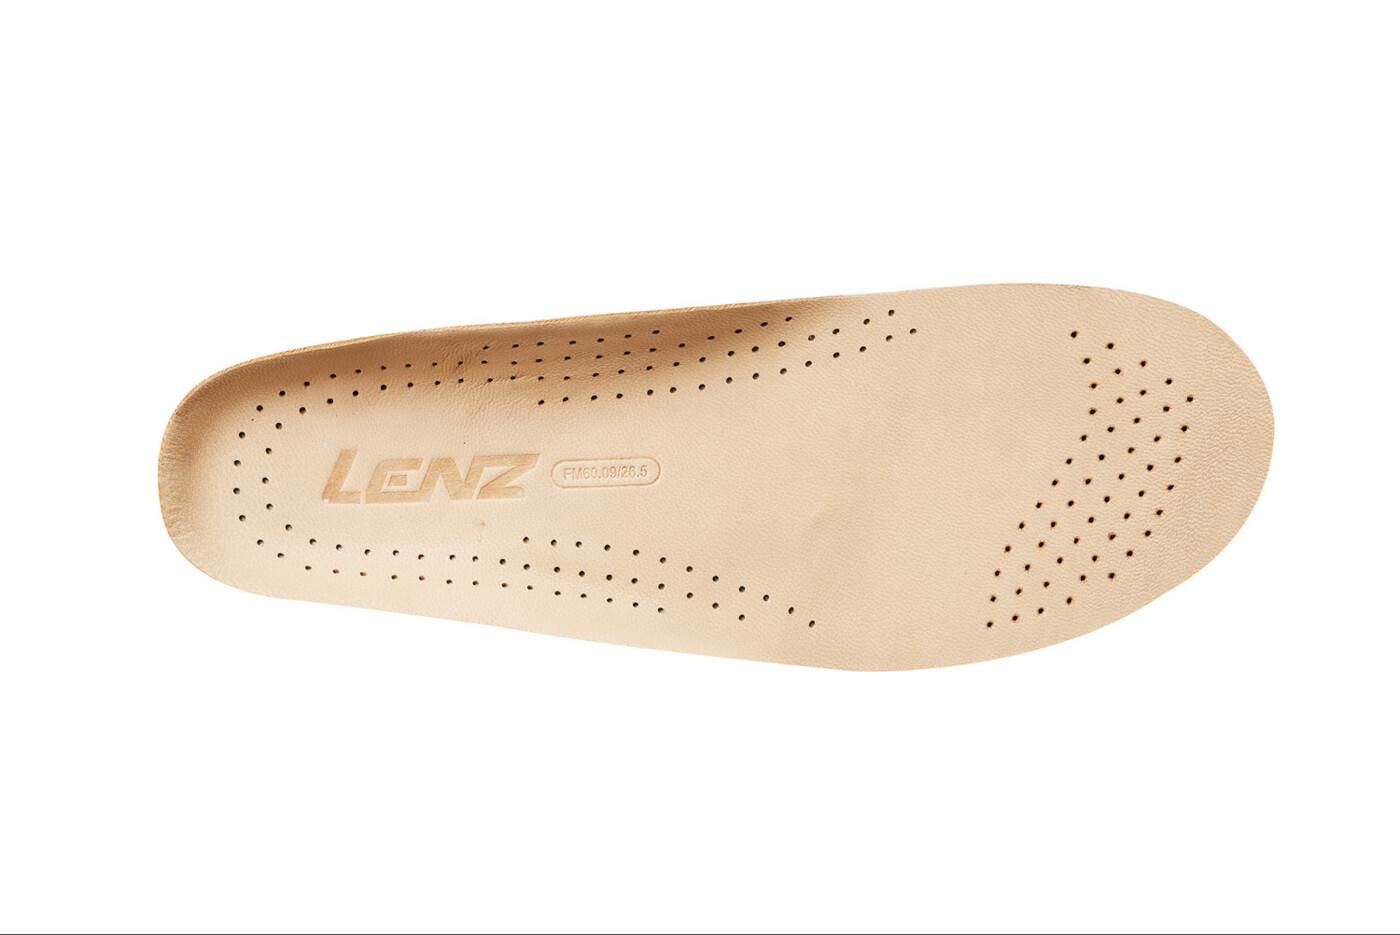 SOHLE INSOLDE TOP LEATHER PERFORATED CUSTOMIZED INSOLES LENZ